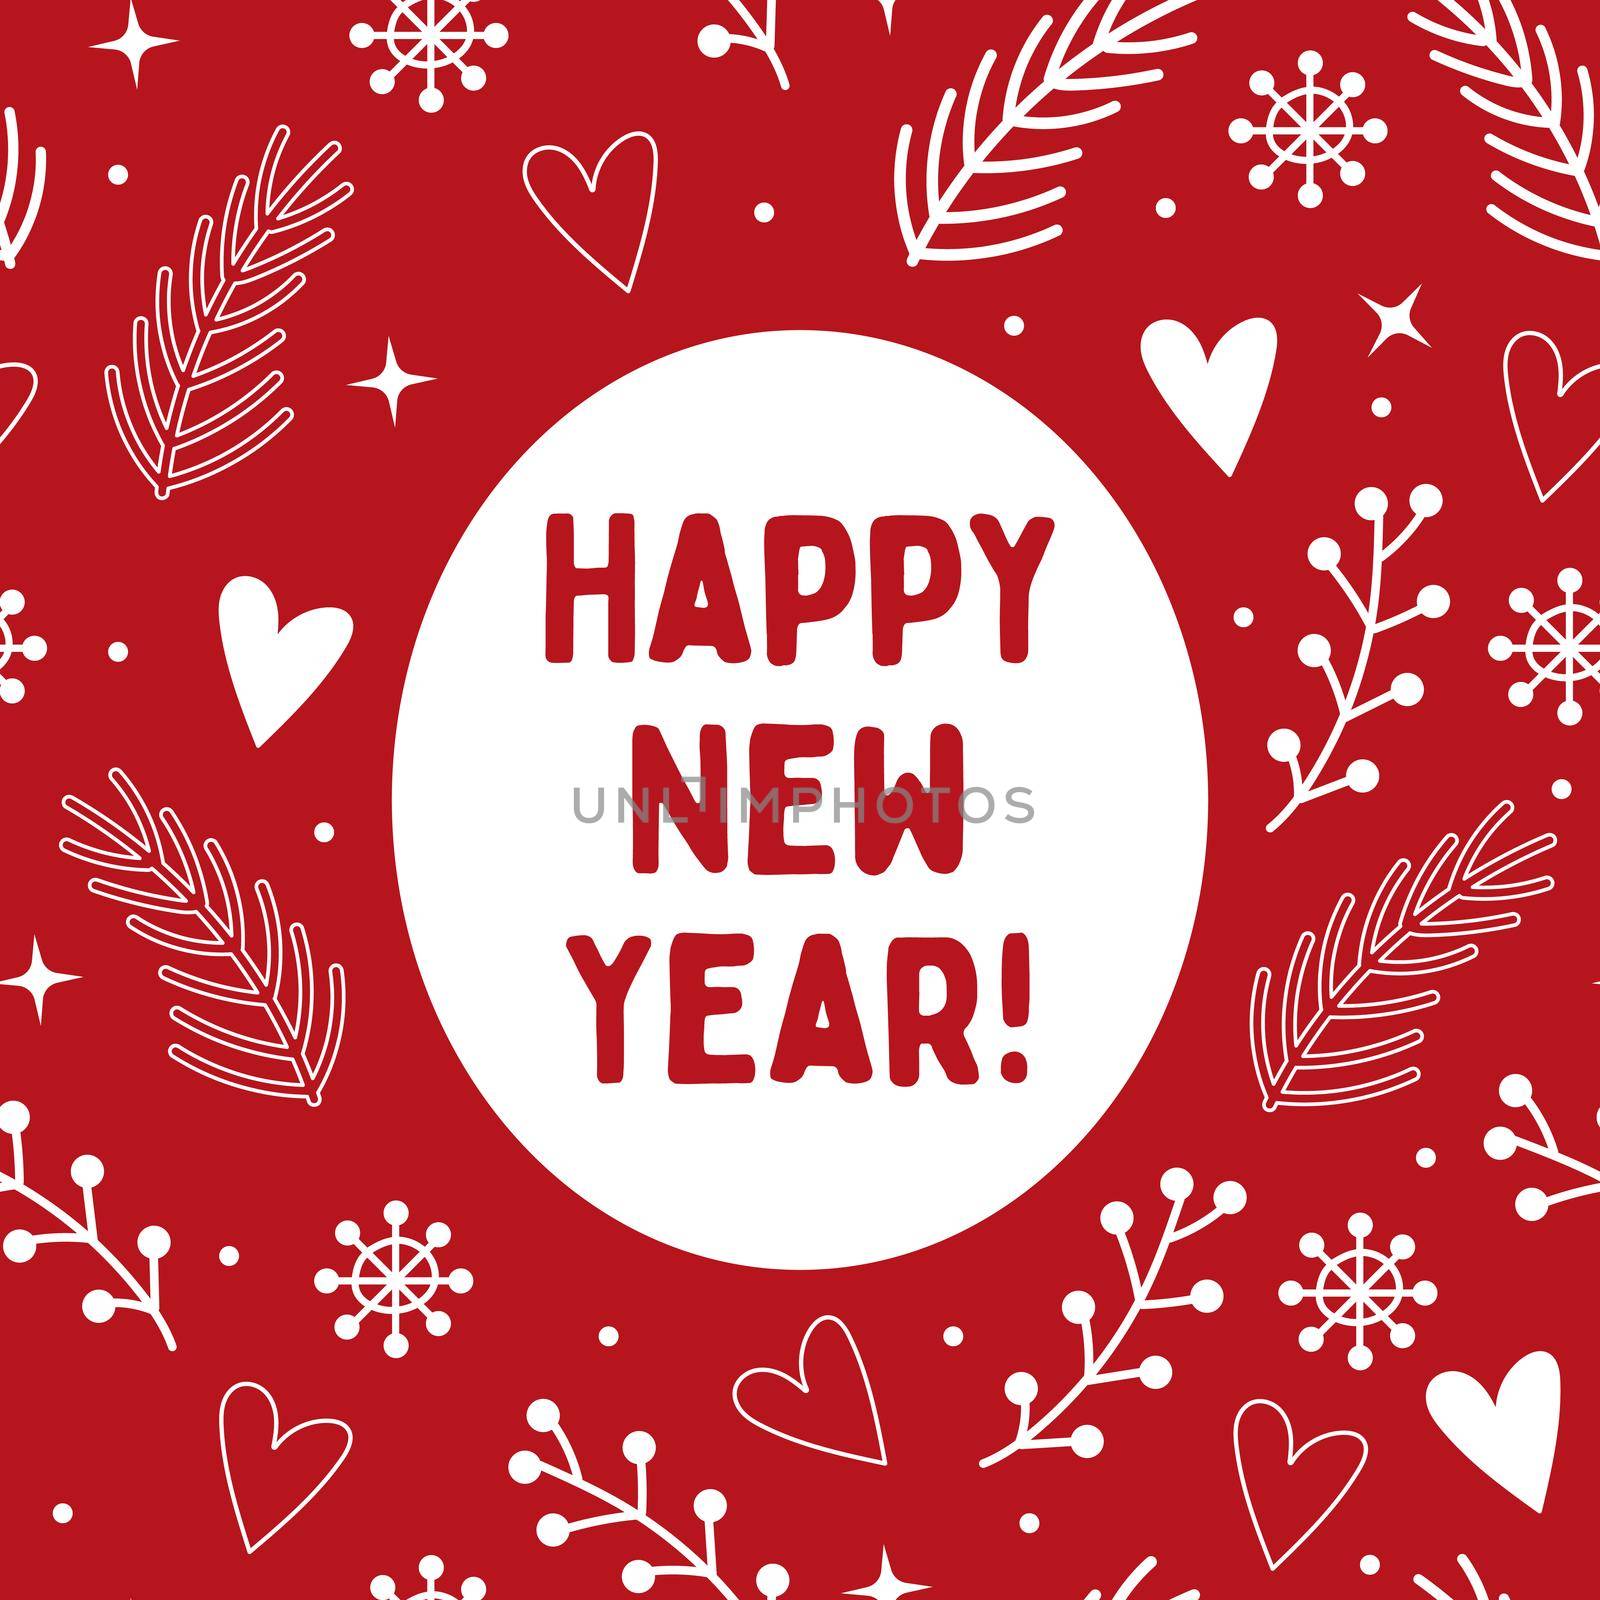 Happy new year quote, vector text for design greeting cards, prints, posters. Hand drawn letters. Red background